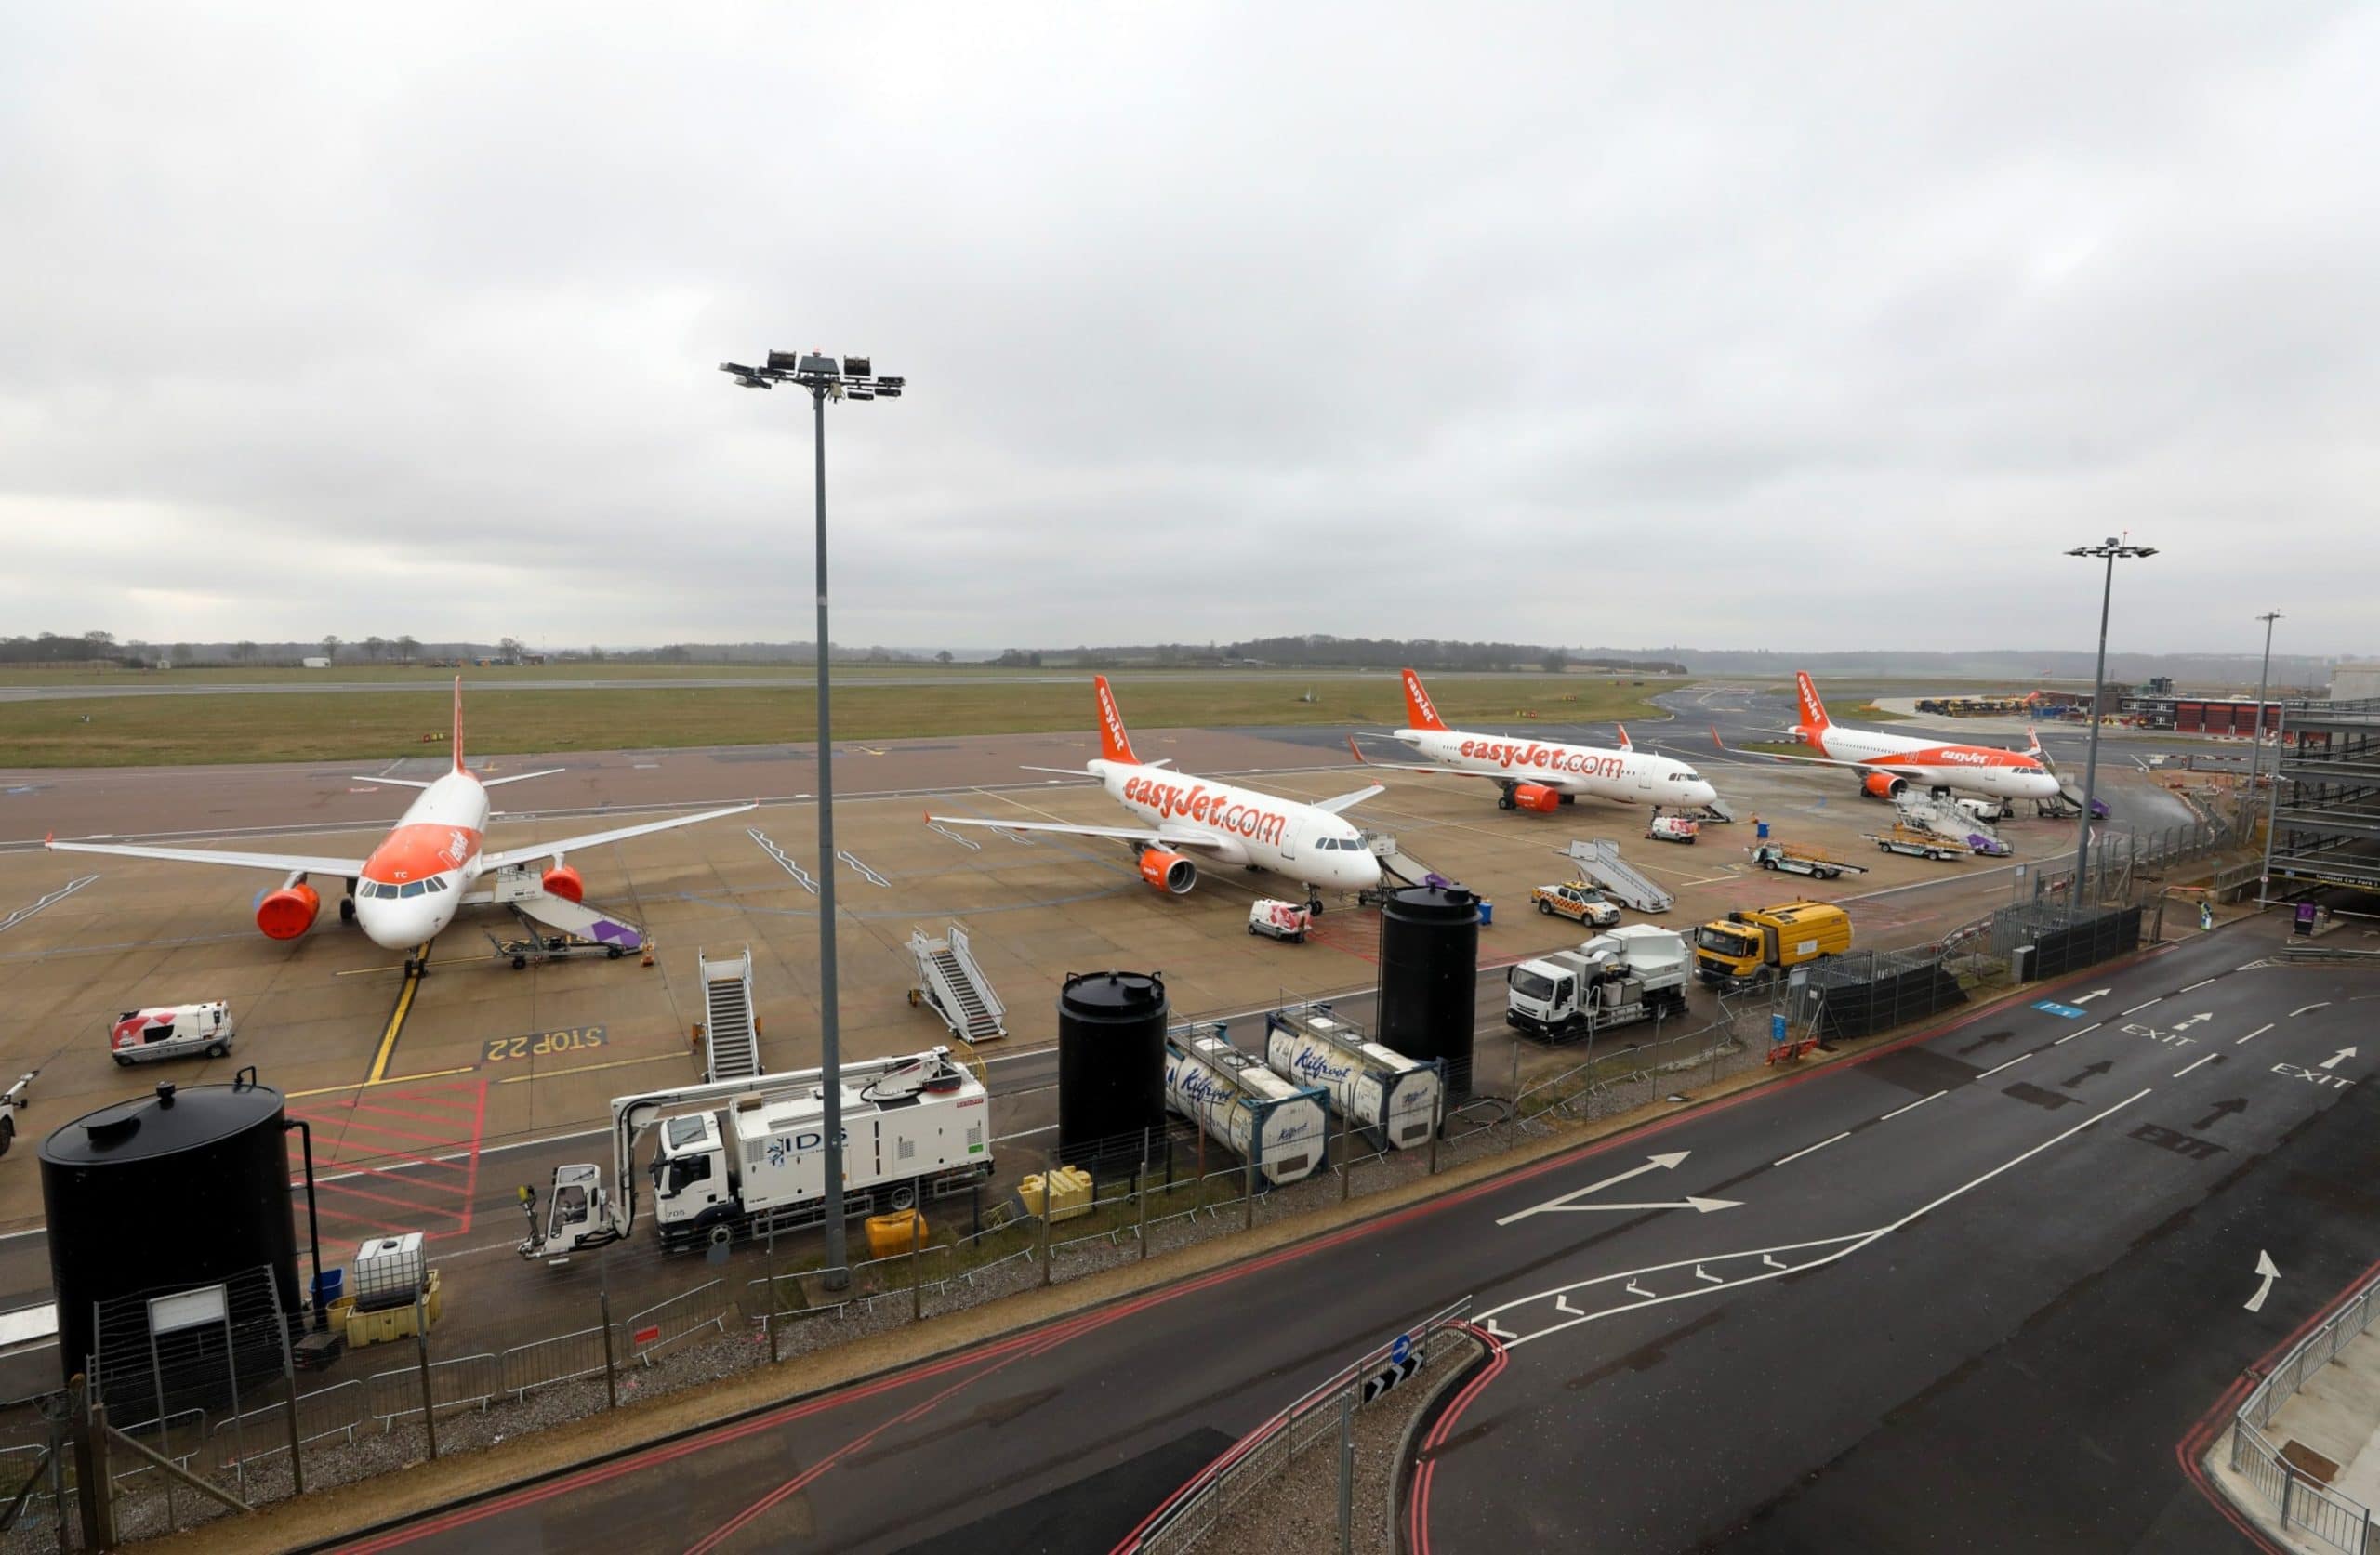 Passenger aircraft, operated by Easyjet Plc, sit parked at London Luton Airport in Luton, U.K., on Monday, March 30, 2020. EasyJet grounded its entire fleet after completing customer-repatriation flights, and said it's in talks to build a cash cushion to see it through the gap in business caused by the coronavirus. Photo: Bloomberg